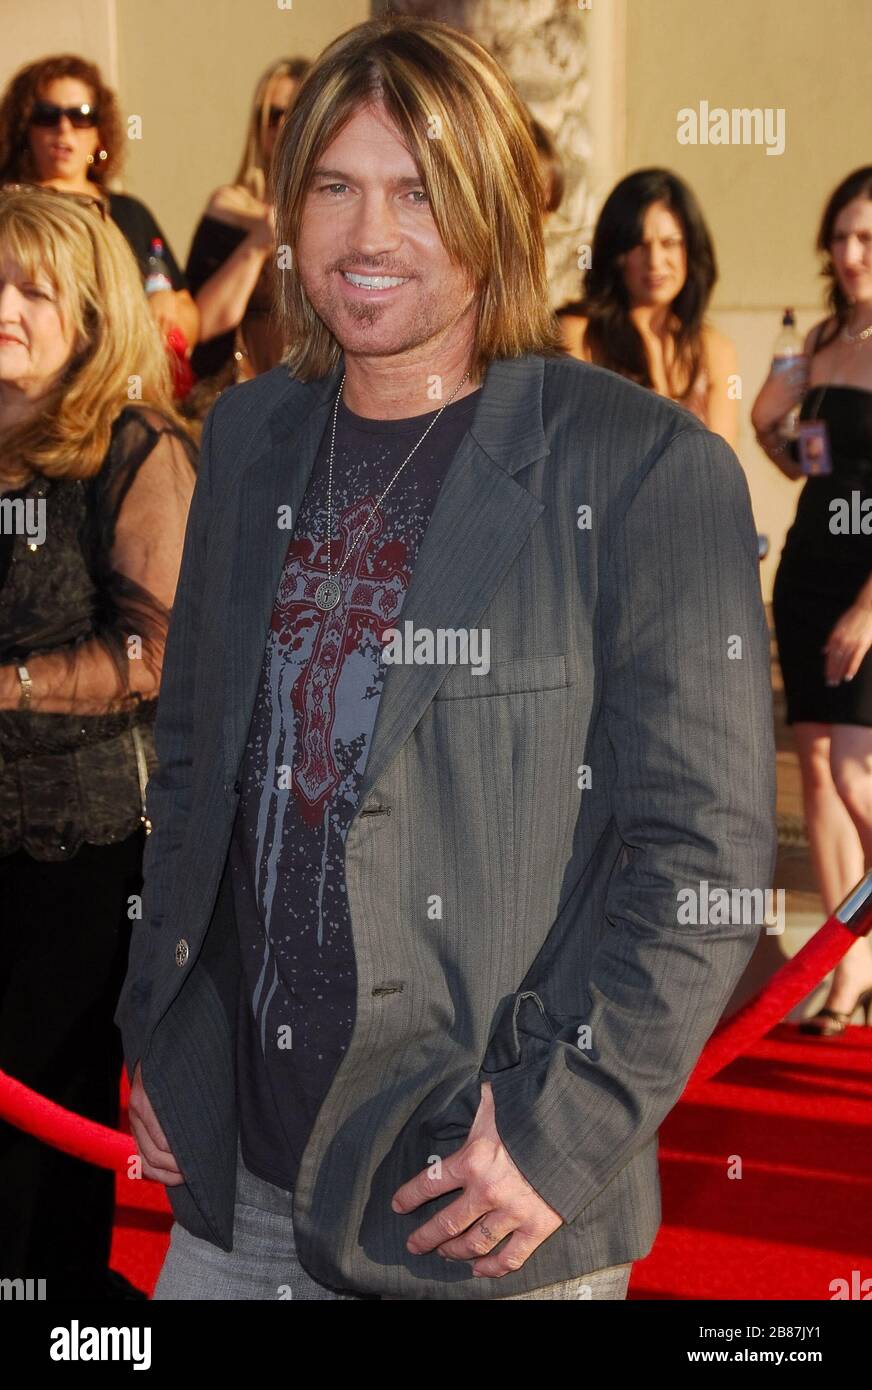 Billy Ray Cyrus at the 34th Annual American Music Awards held at the Shrine Auditorium in Los Angeles, CA. The event took place on Tuesday, November 21, 2006.  Photo by: SBM / PictureLux - File Reference # 33984-9530SBMPLX Stock Photo